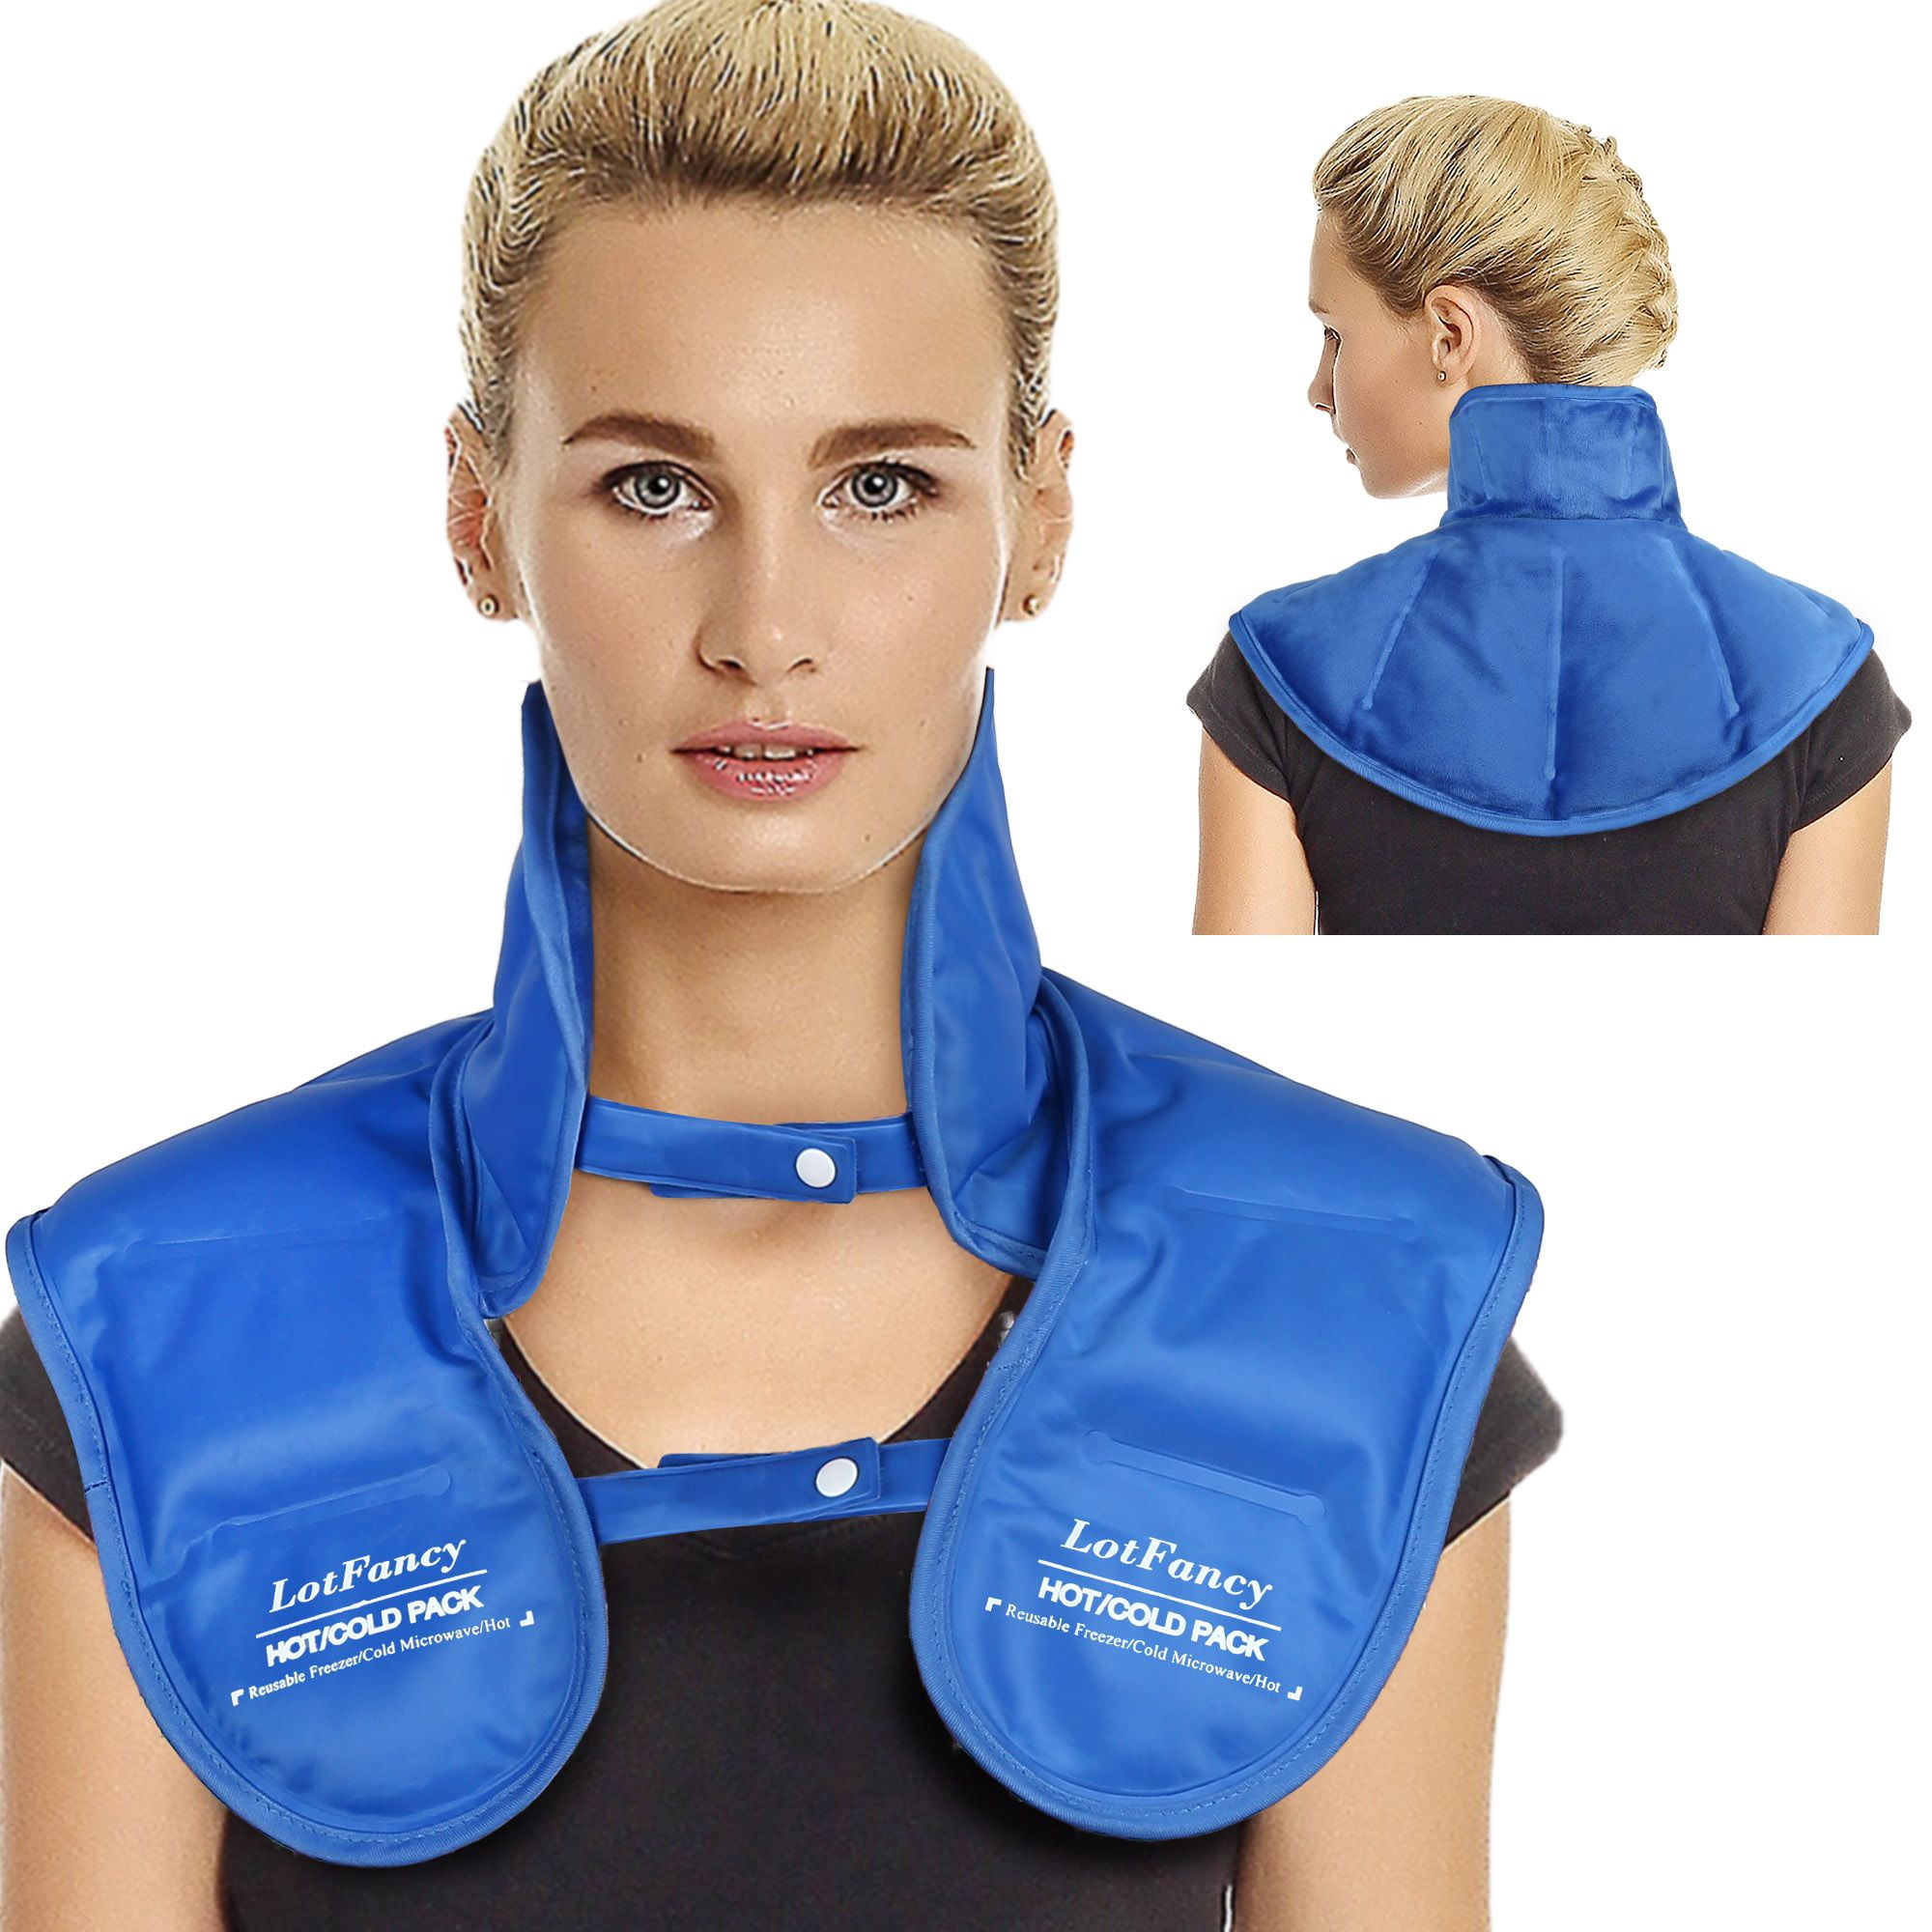 Flexible Neck Ice Pack for Pain Relief, and Shoulder Pain - Magicgel –  Gelpacks